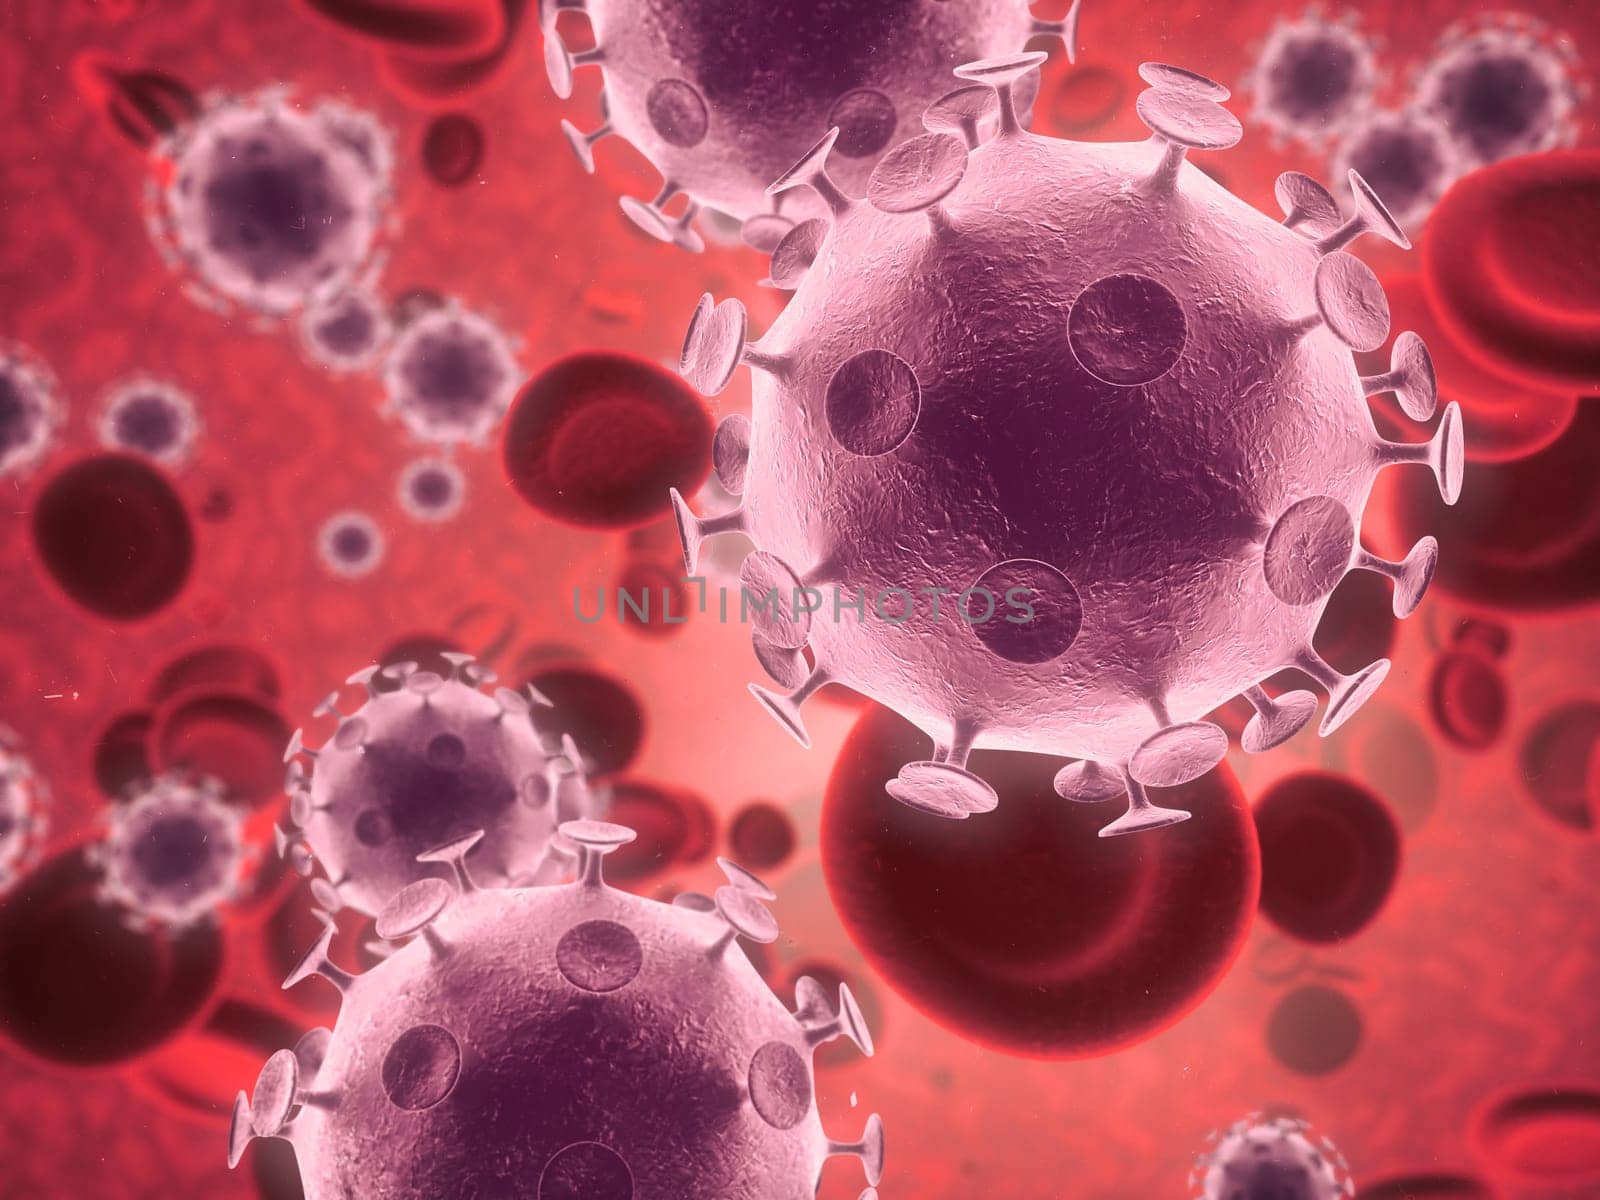 Virus, germ and molecule with abstract, render or illustration of blood cells. Immune system, micro biology and sick for science, microscope and medical research for sepsis or senolytics treatment.